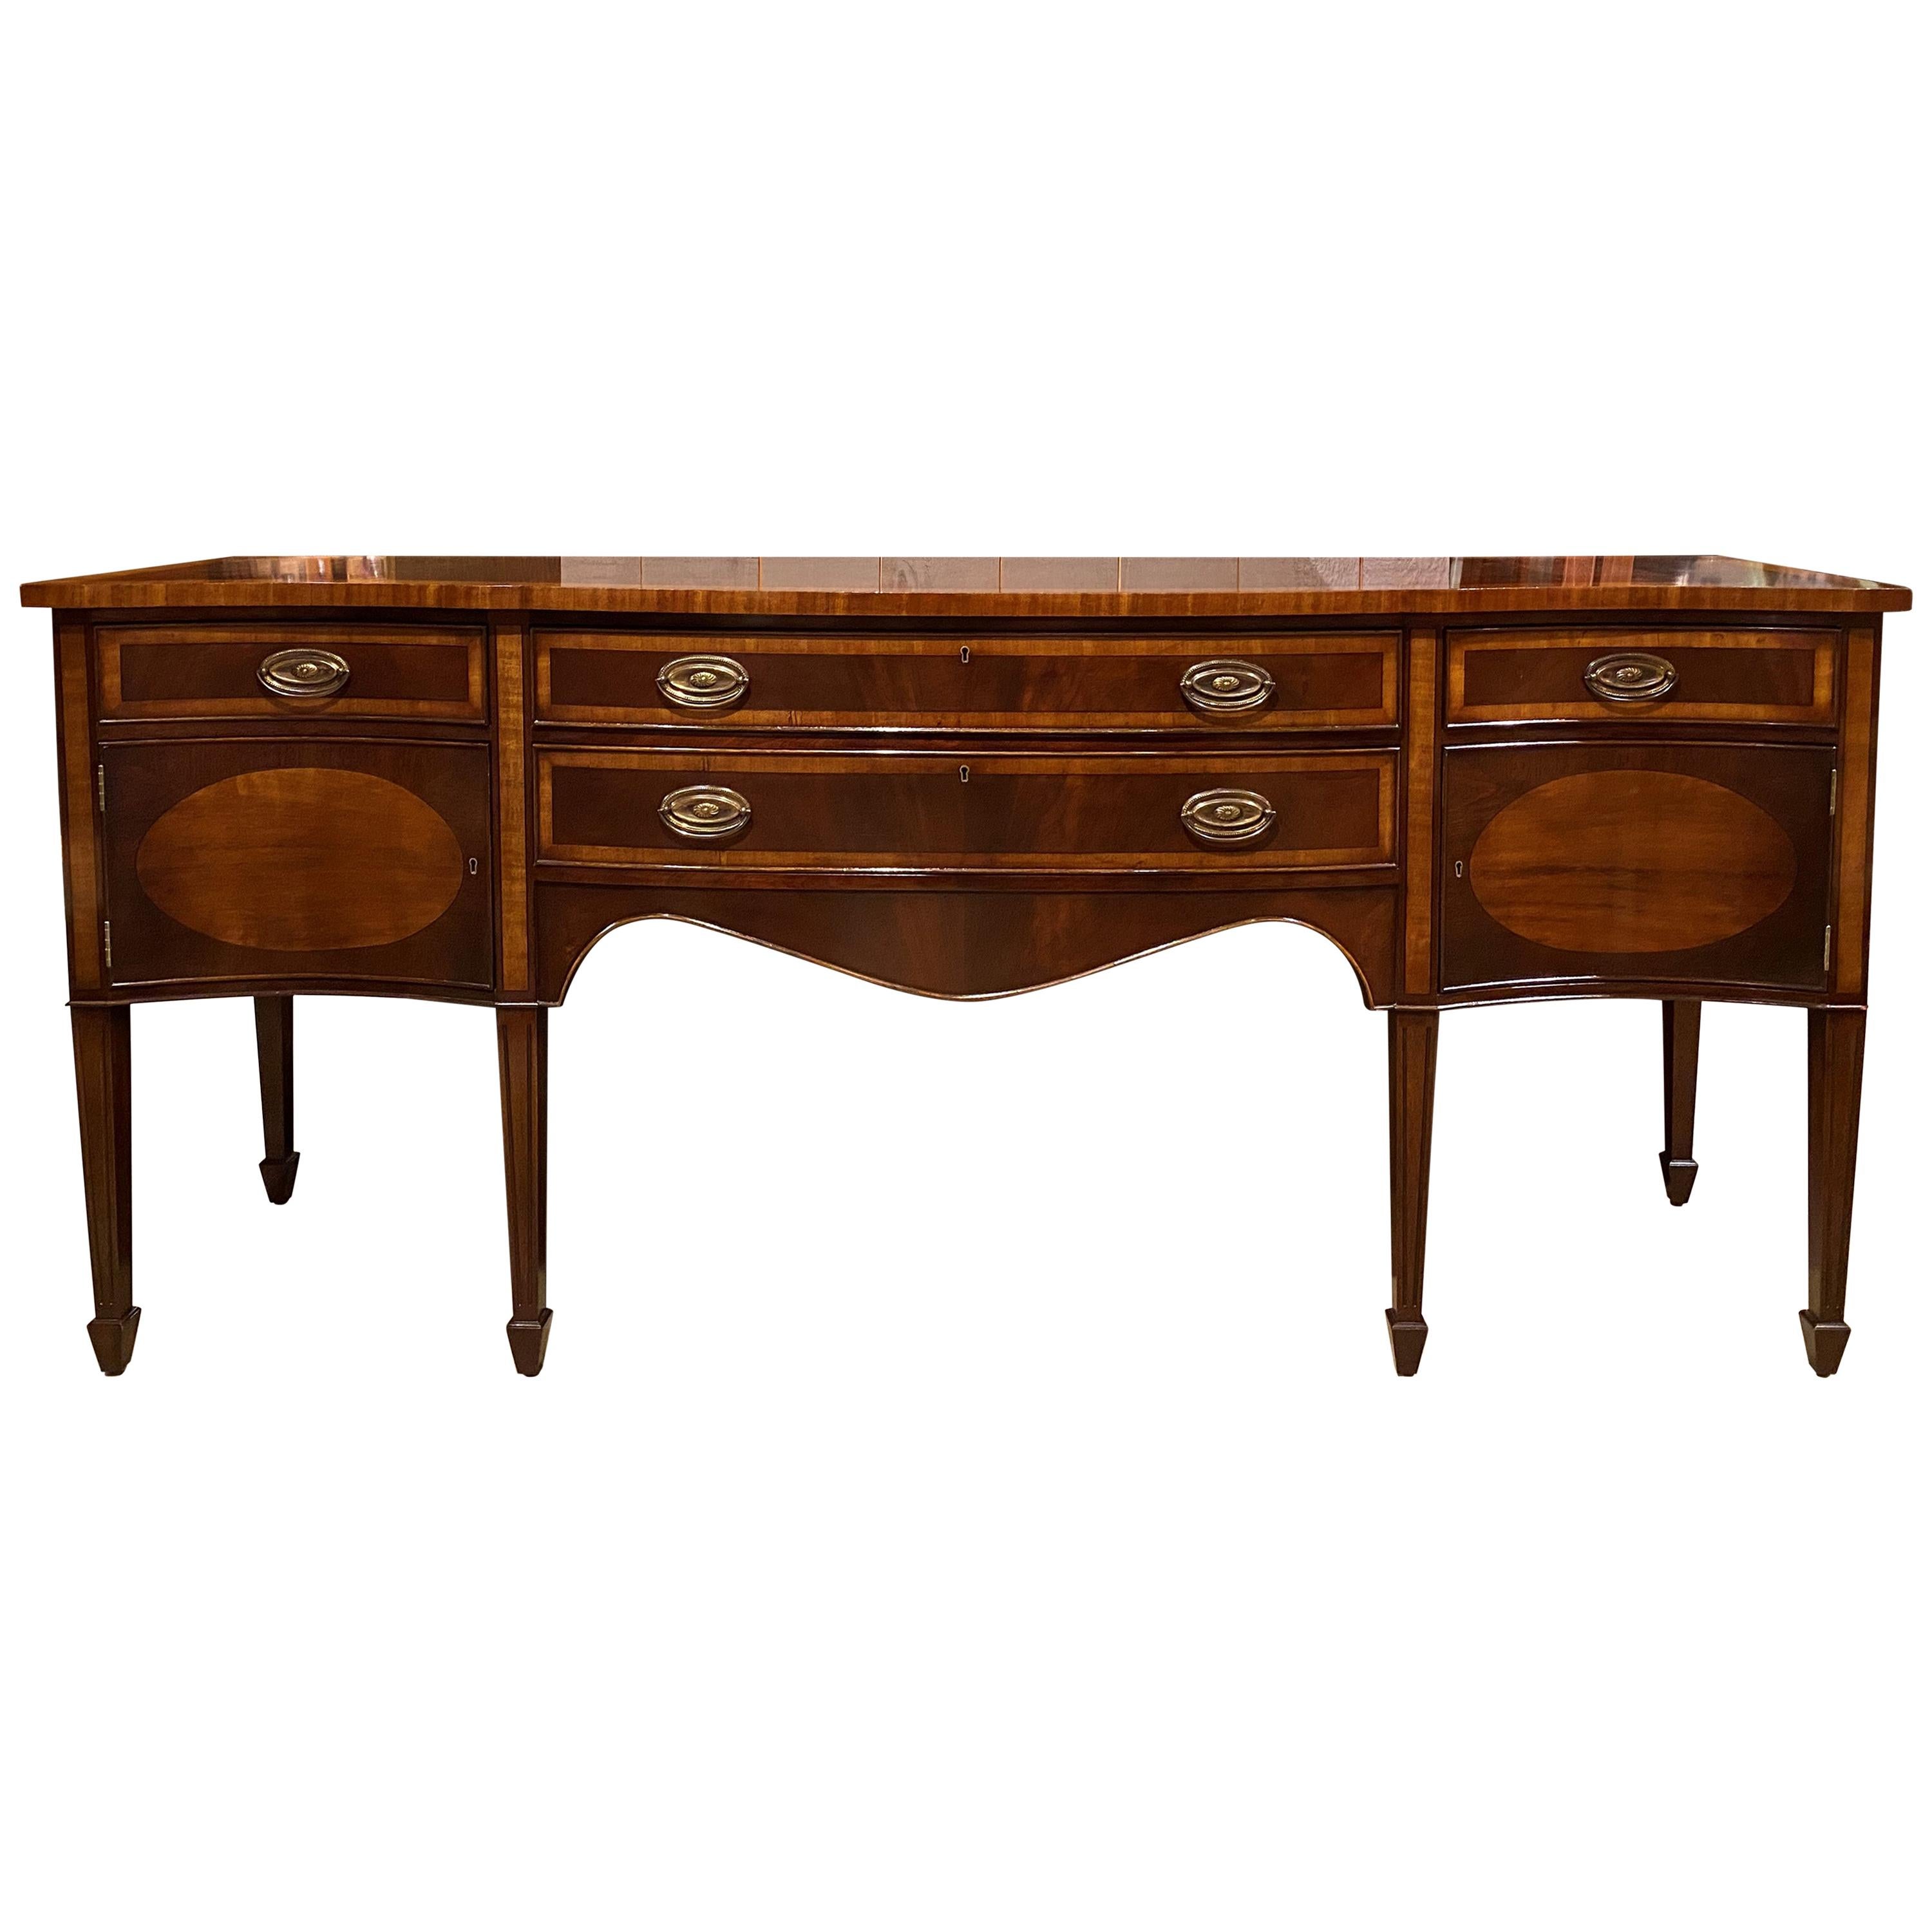 Trosby Furniture Sussex Georgian Style Sideboard in Mahogany and Inlaid Yew Wood